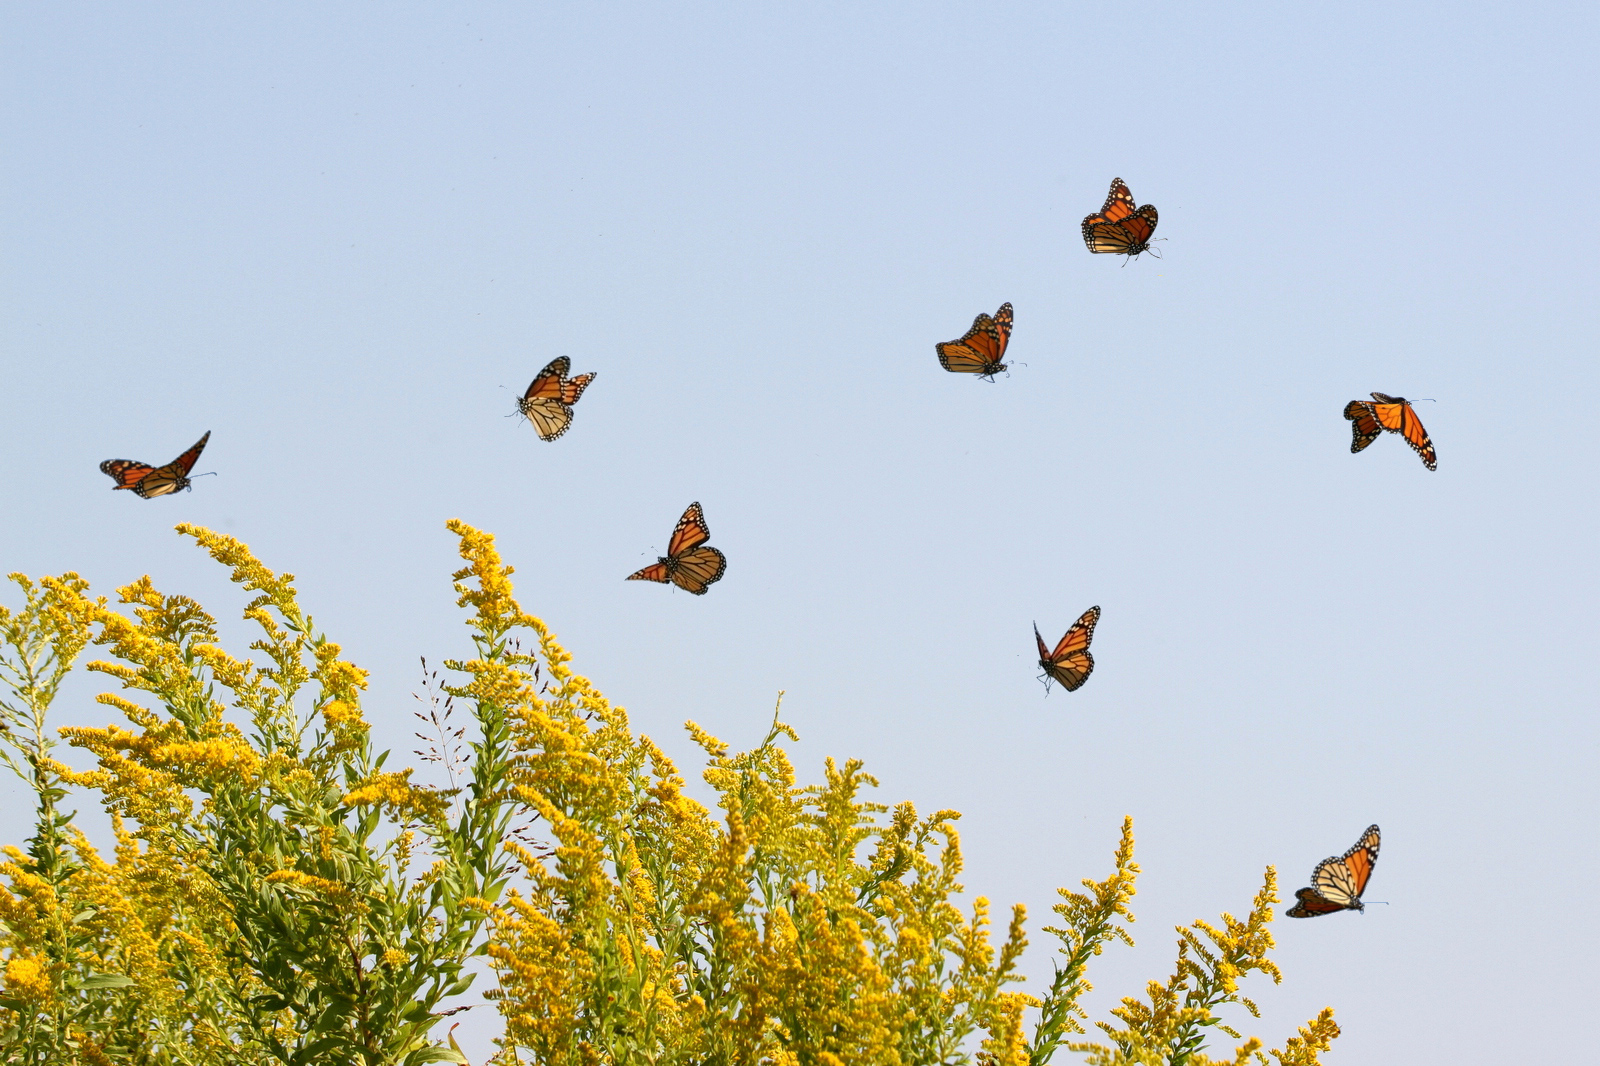 Orange and black monarch butterflies descend toward thick yellow flowers against a light blue sky.